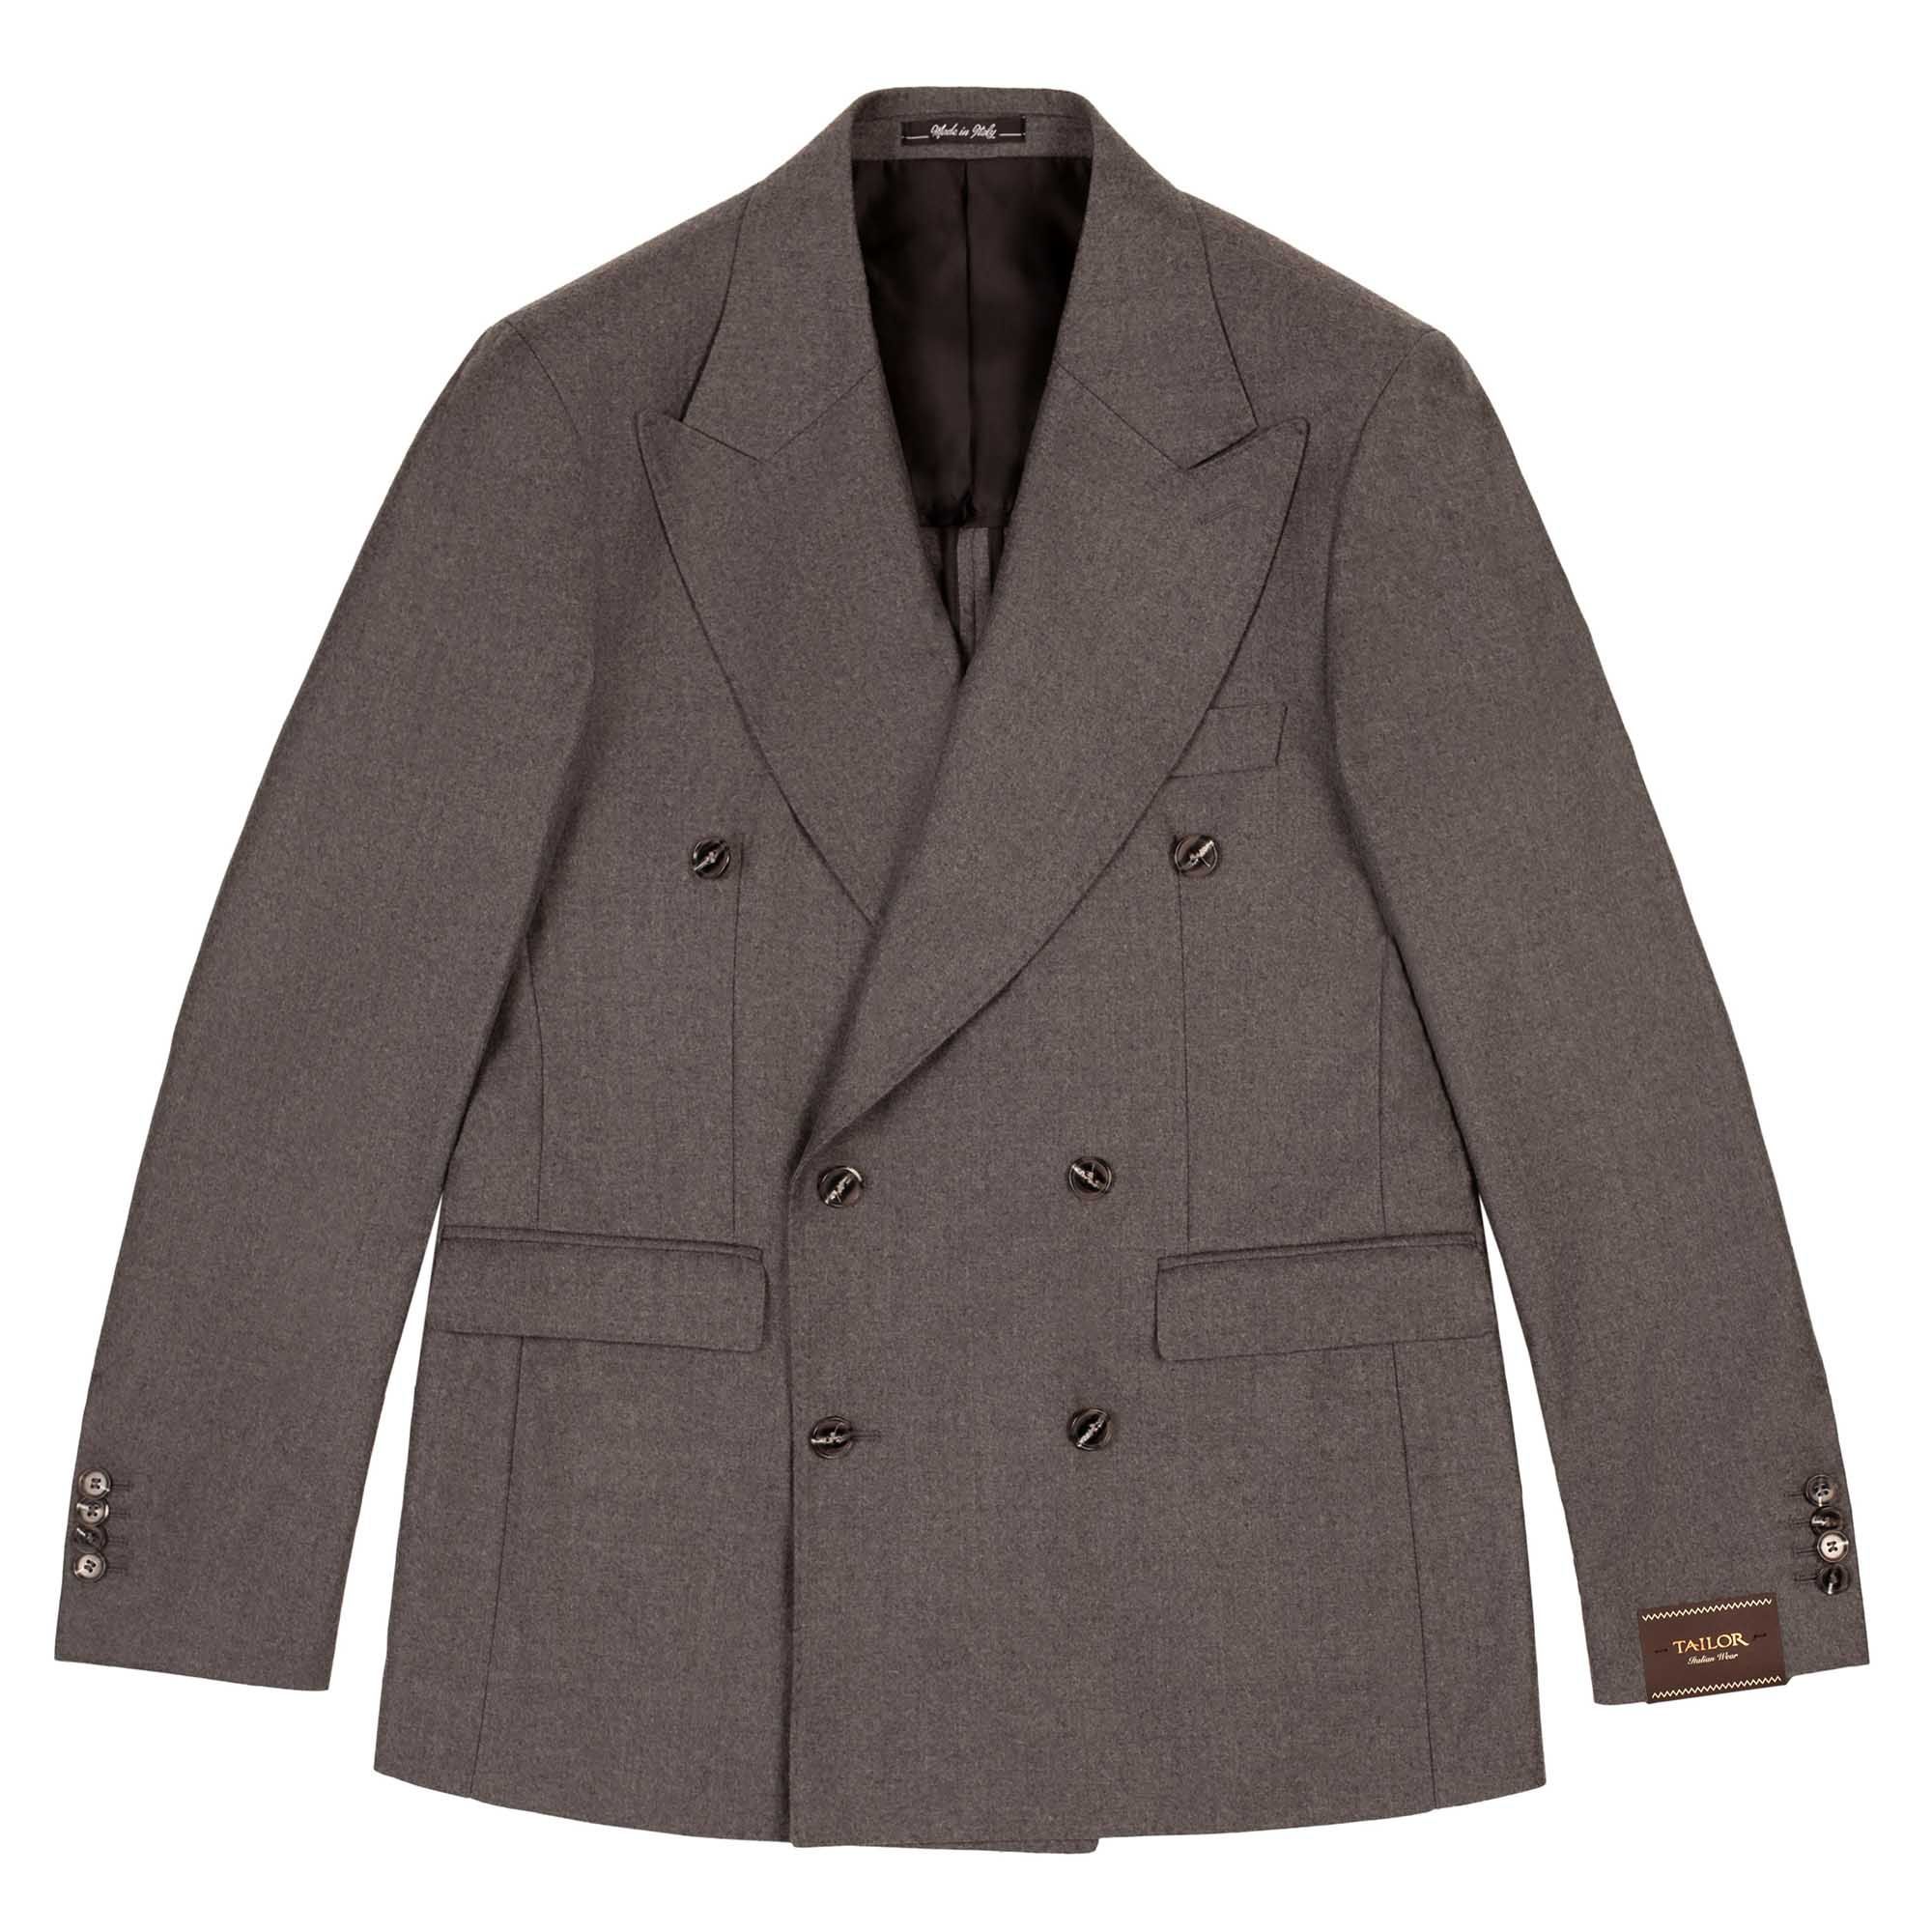 Gray Men's Double Breasted Jacket